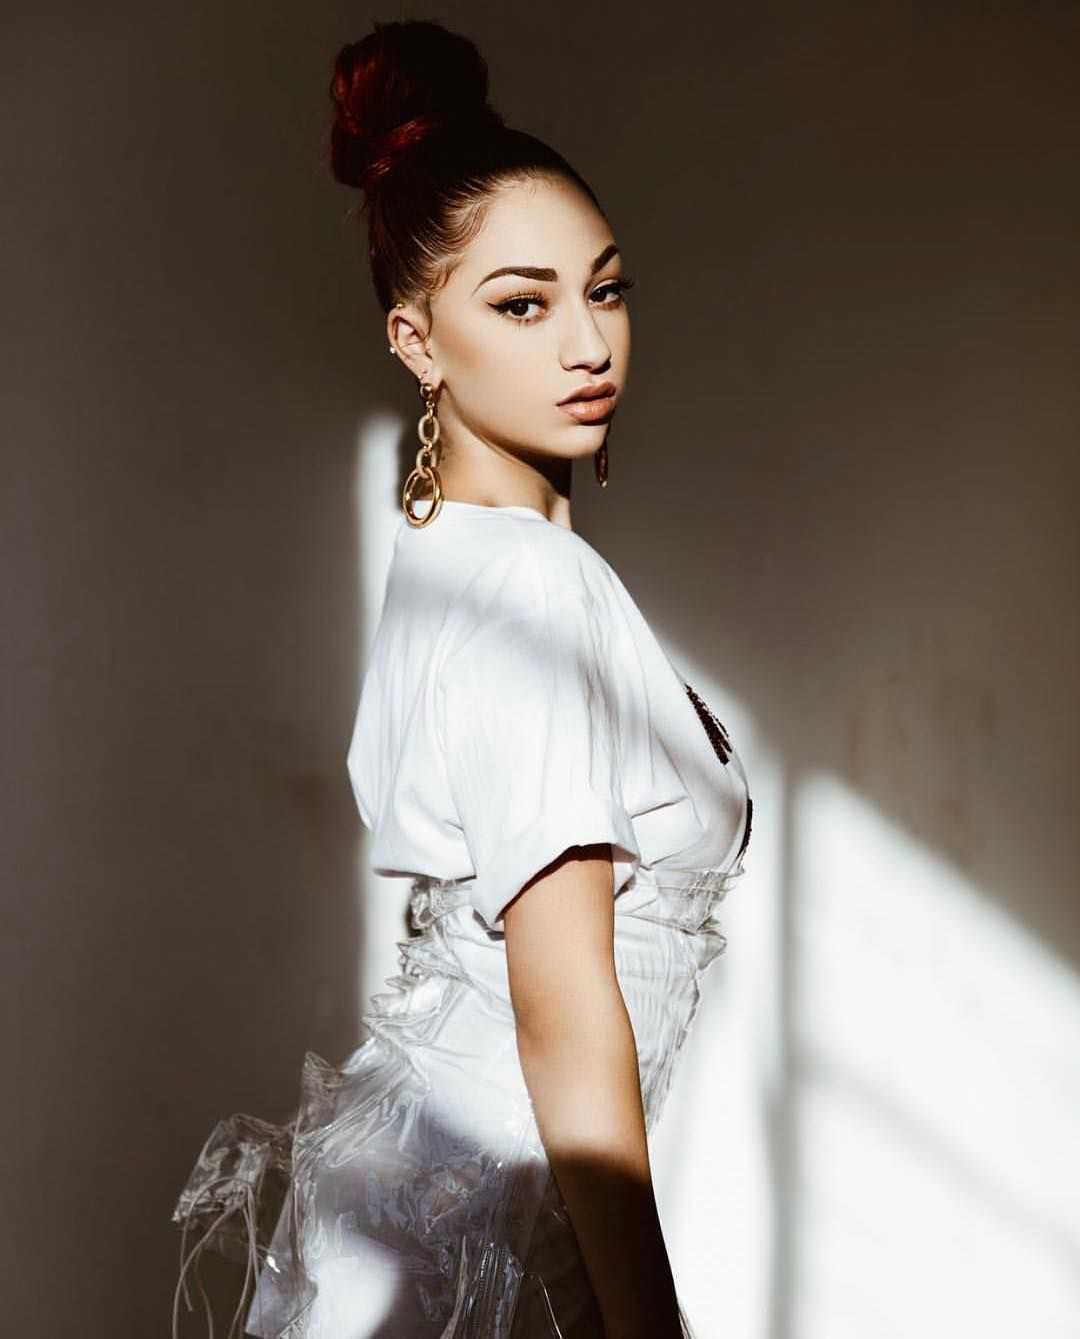 70+ Hot Pictures Of Danielle Bregoli aka Bhad Bhabie Which Will Win Your Heart 288